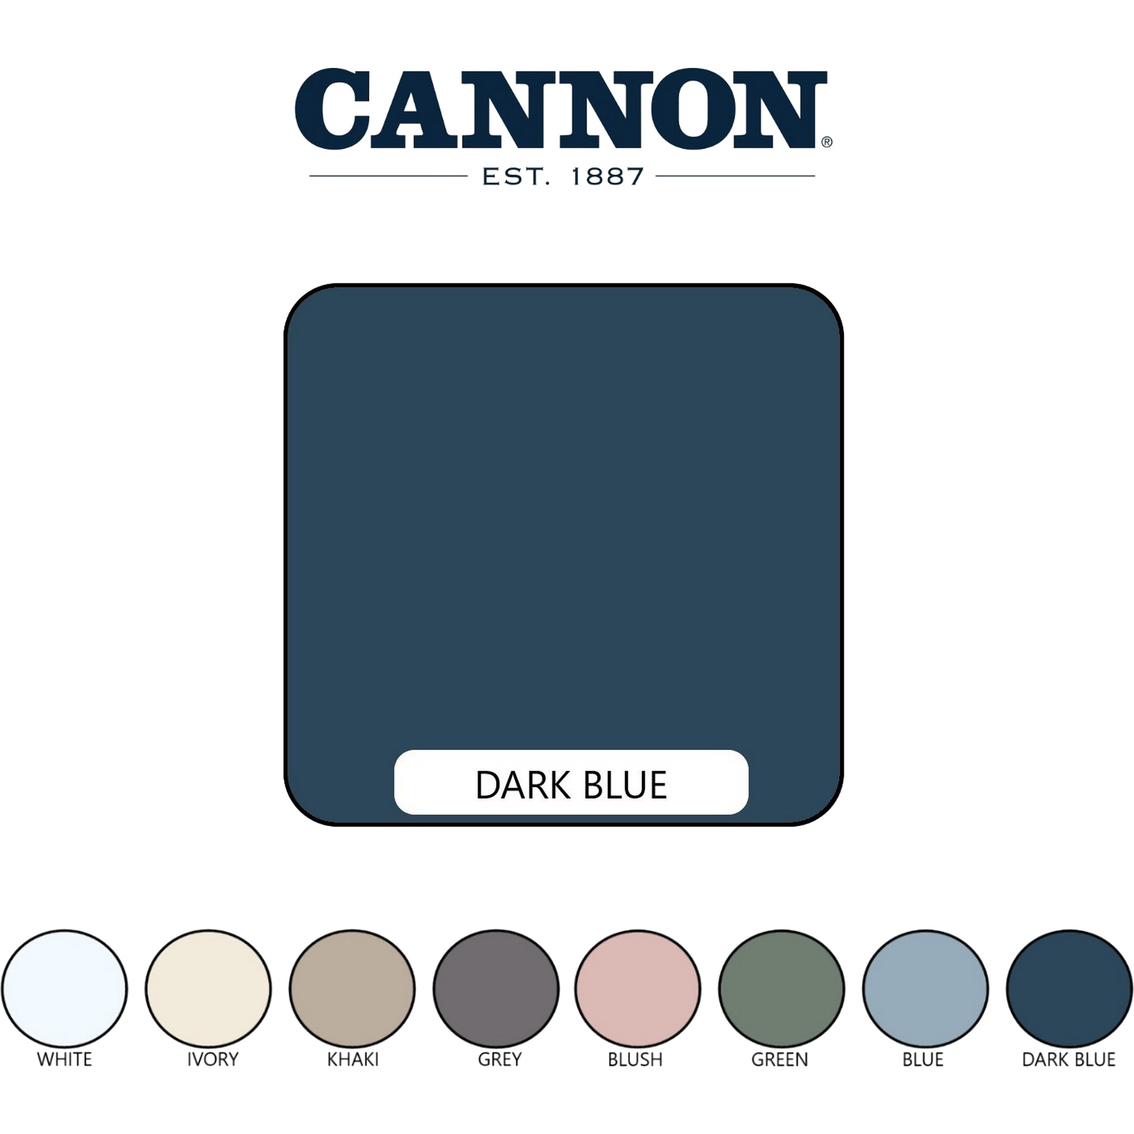 Cannon Heritage Solid Sheet Set - Image 5 of 5